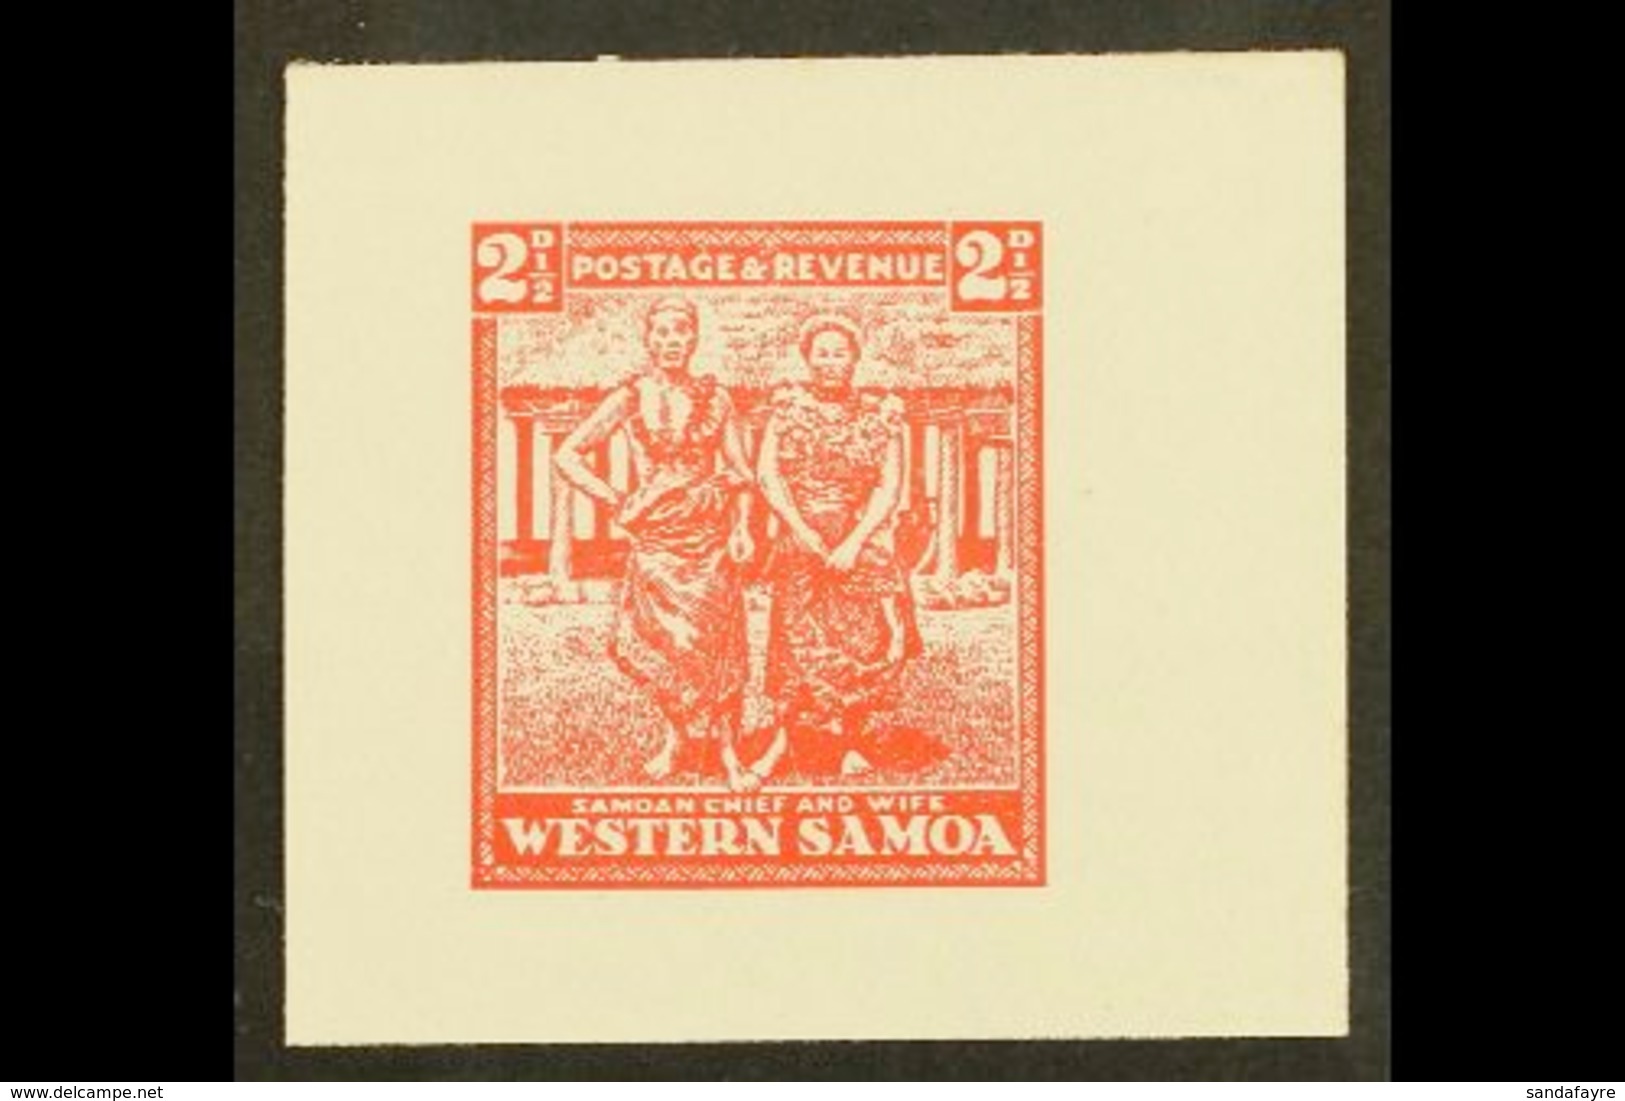 1935 PICTORIAL DEFINITIVE ESSAY Collins Essay For The 2½d Value In Red On Thick White Paper, The "Chief And Wife" Design - Samoa (Staat)